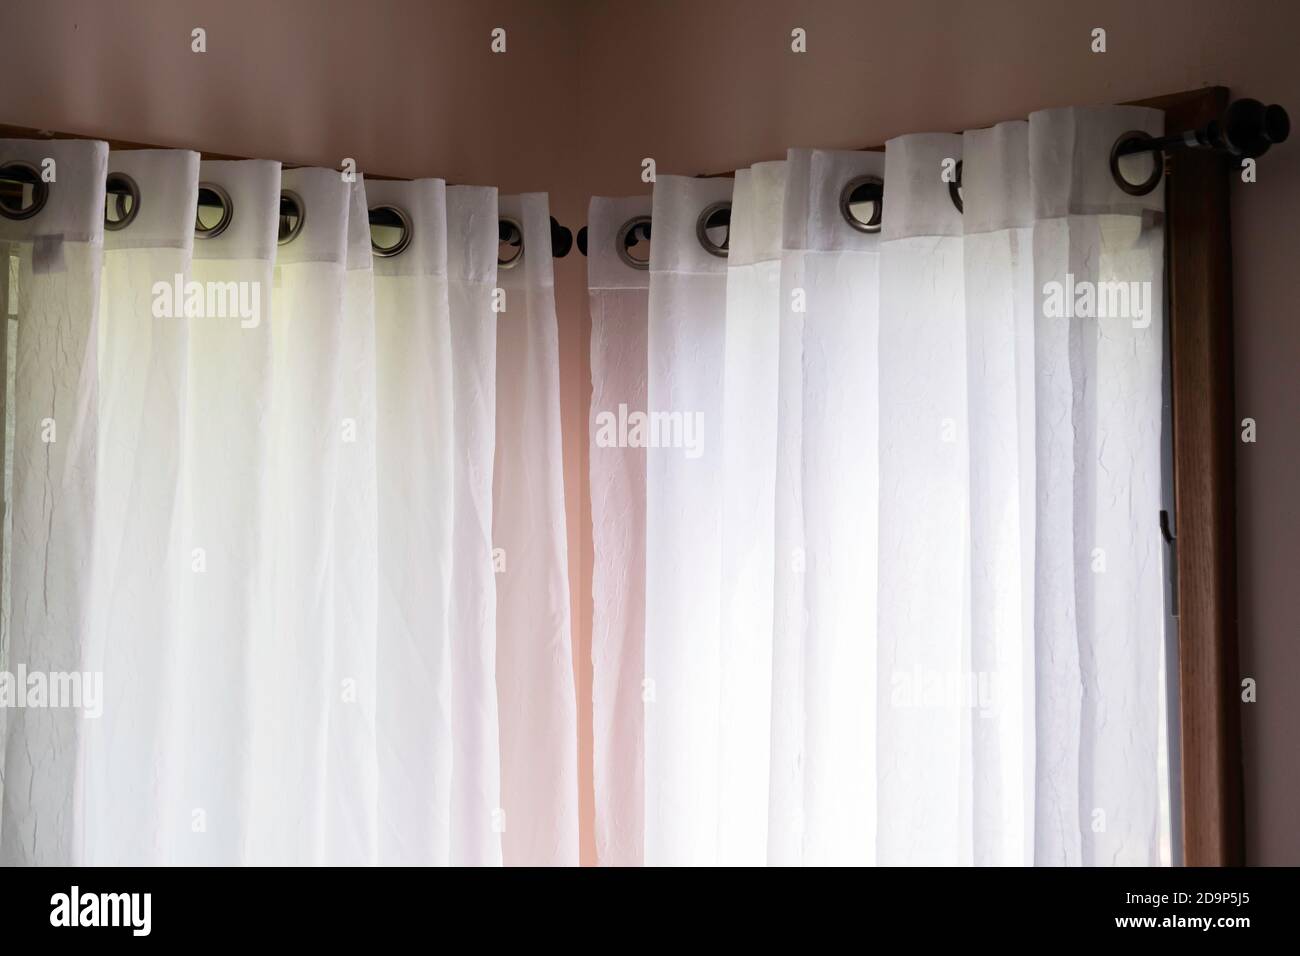 White semi-sheer curtains hanging from a decorative rod against peach walls. Stock Photo